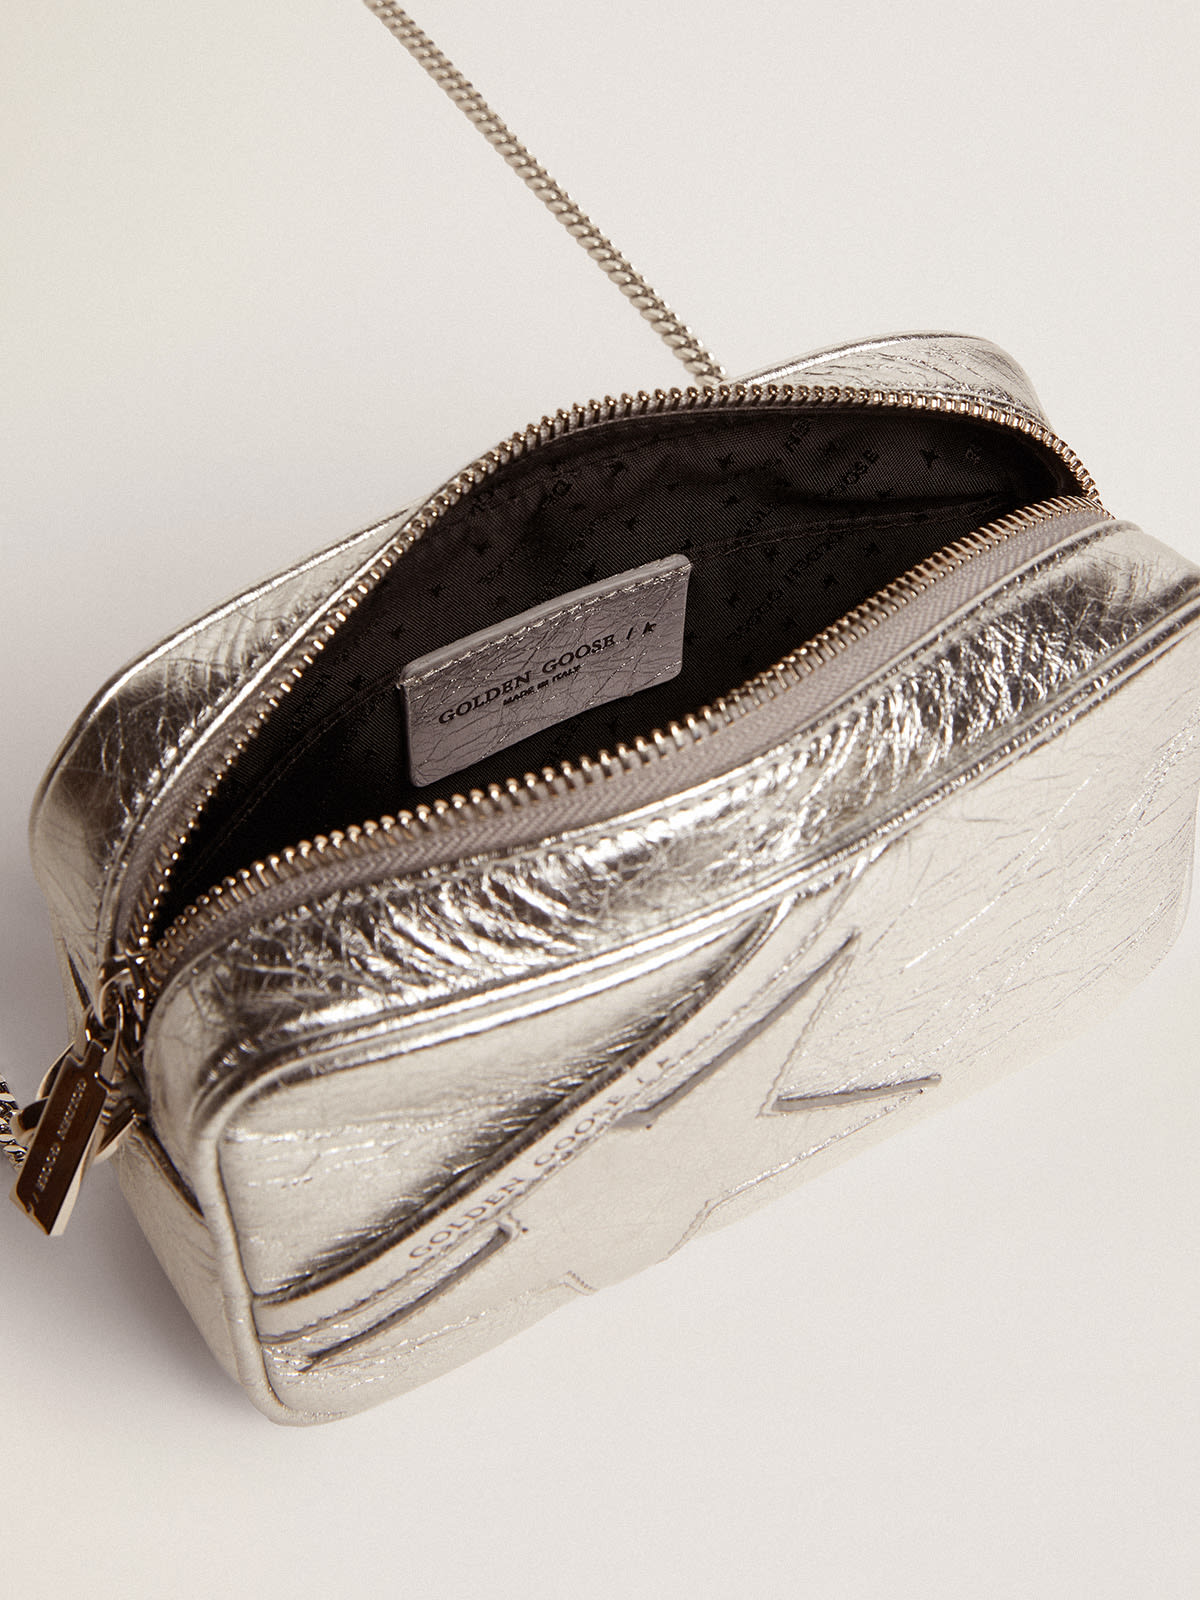 Golden Goose - Mini Star Bag in silver laminated leather with tone-on-tone star in 